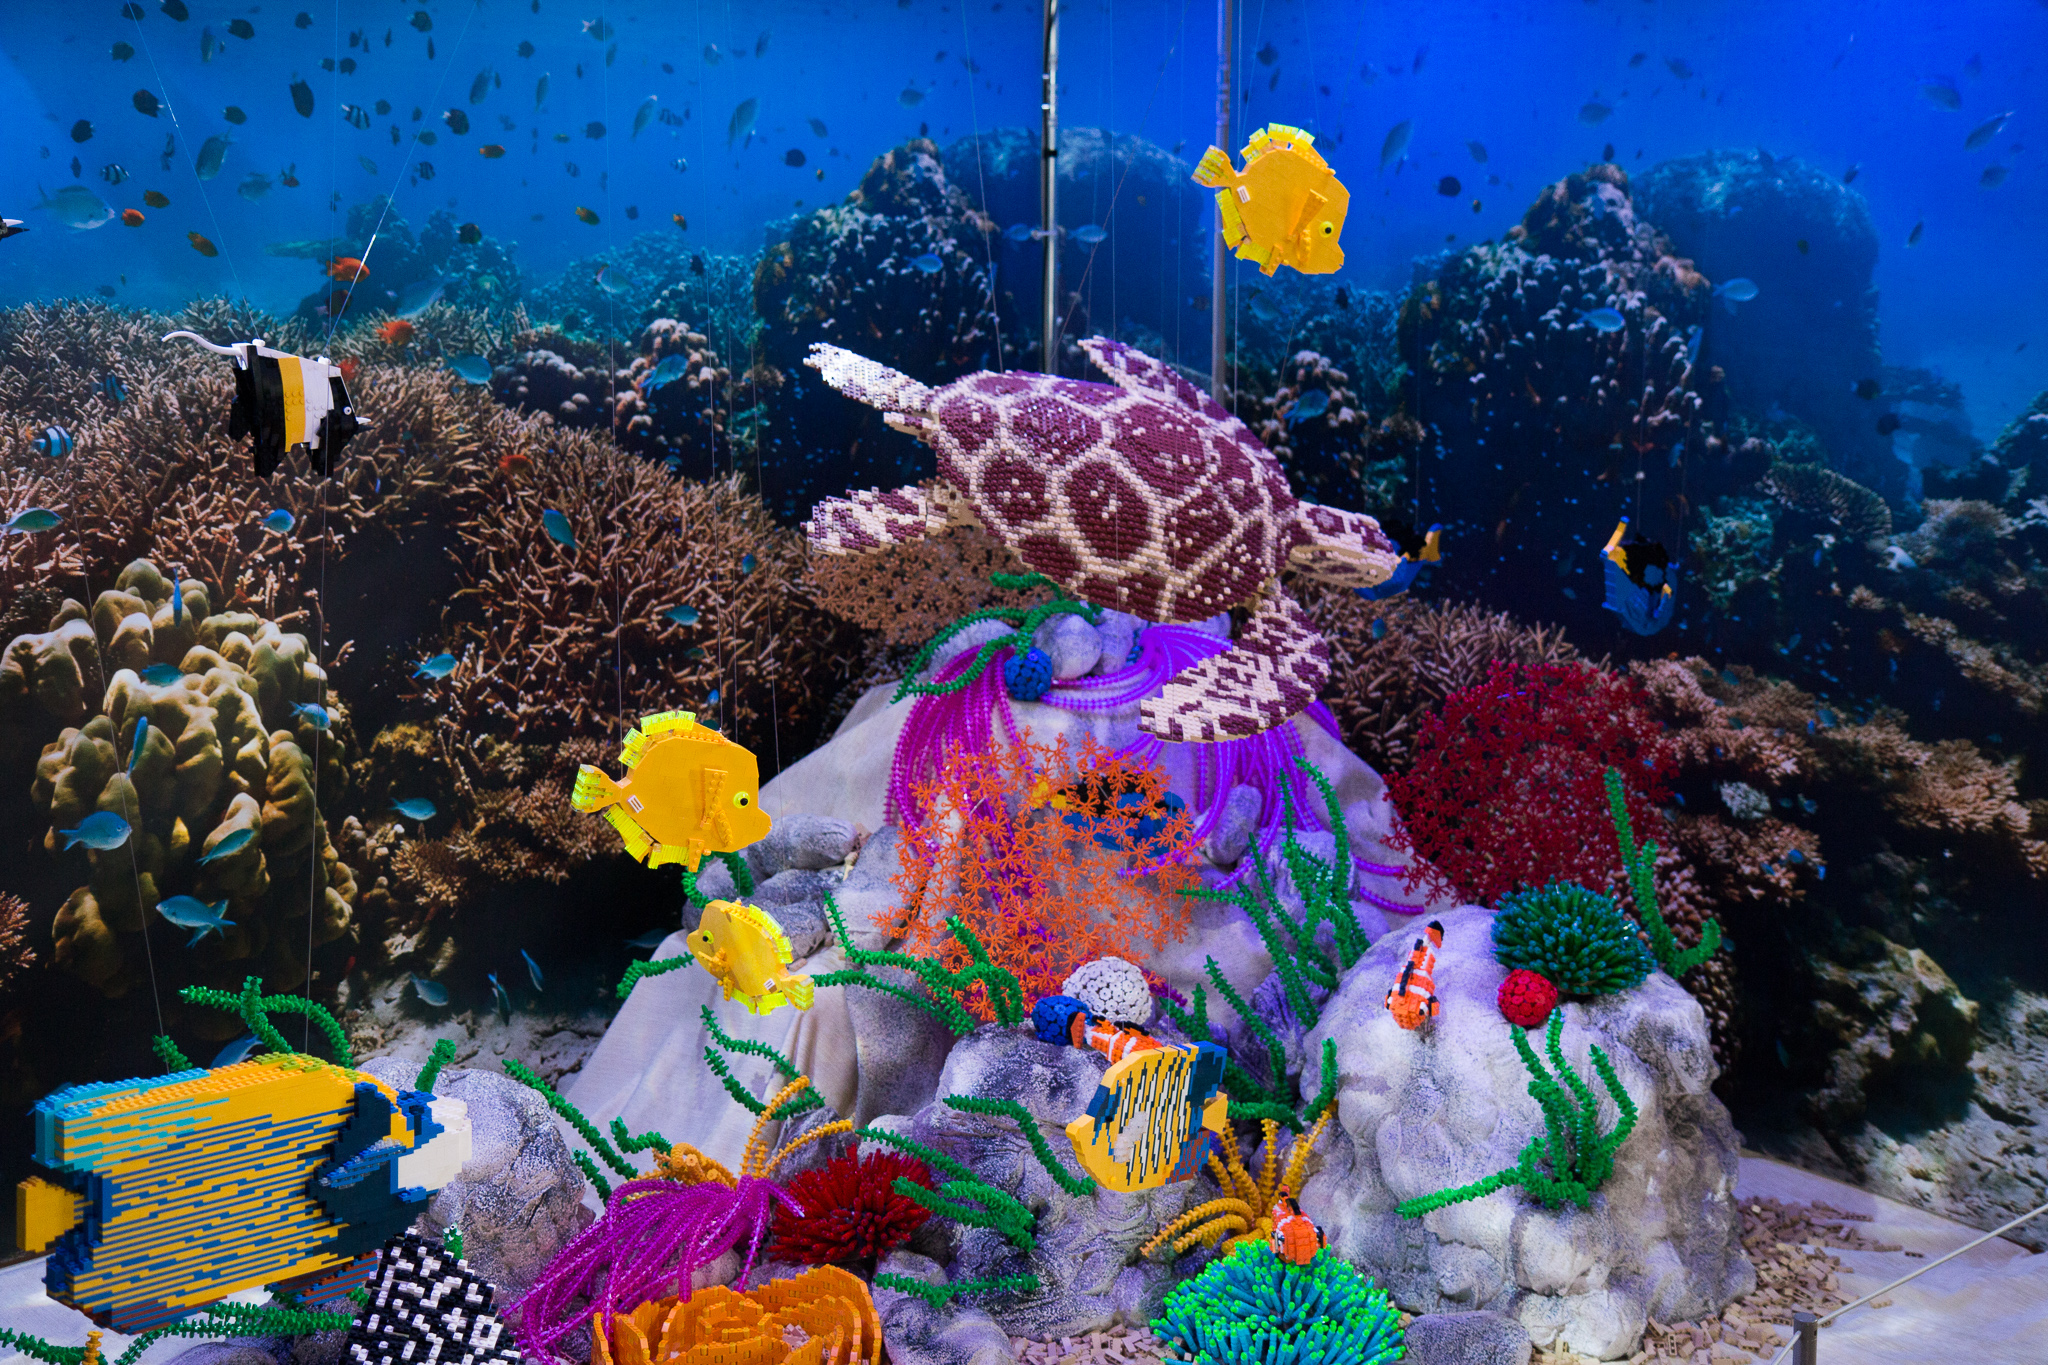 The Great Barrier Reef in Australia features in the Brick Wonders exhibition at The Atkinson in Southport